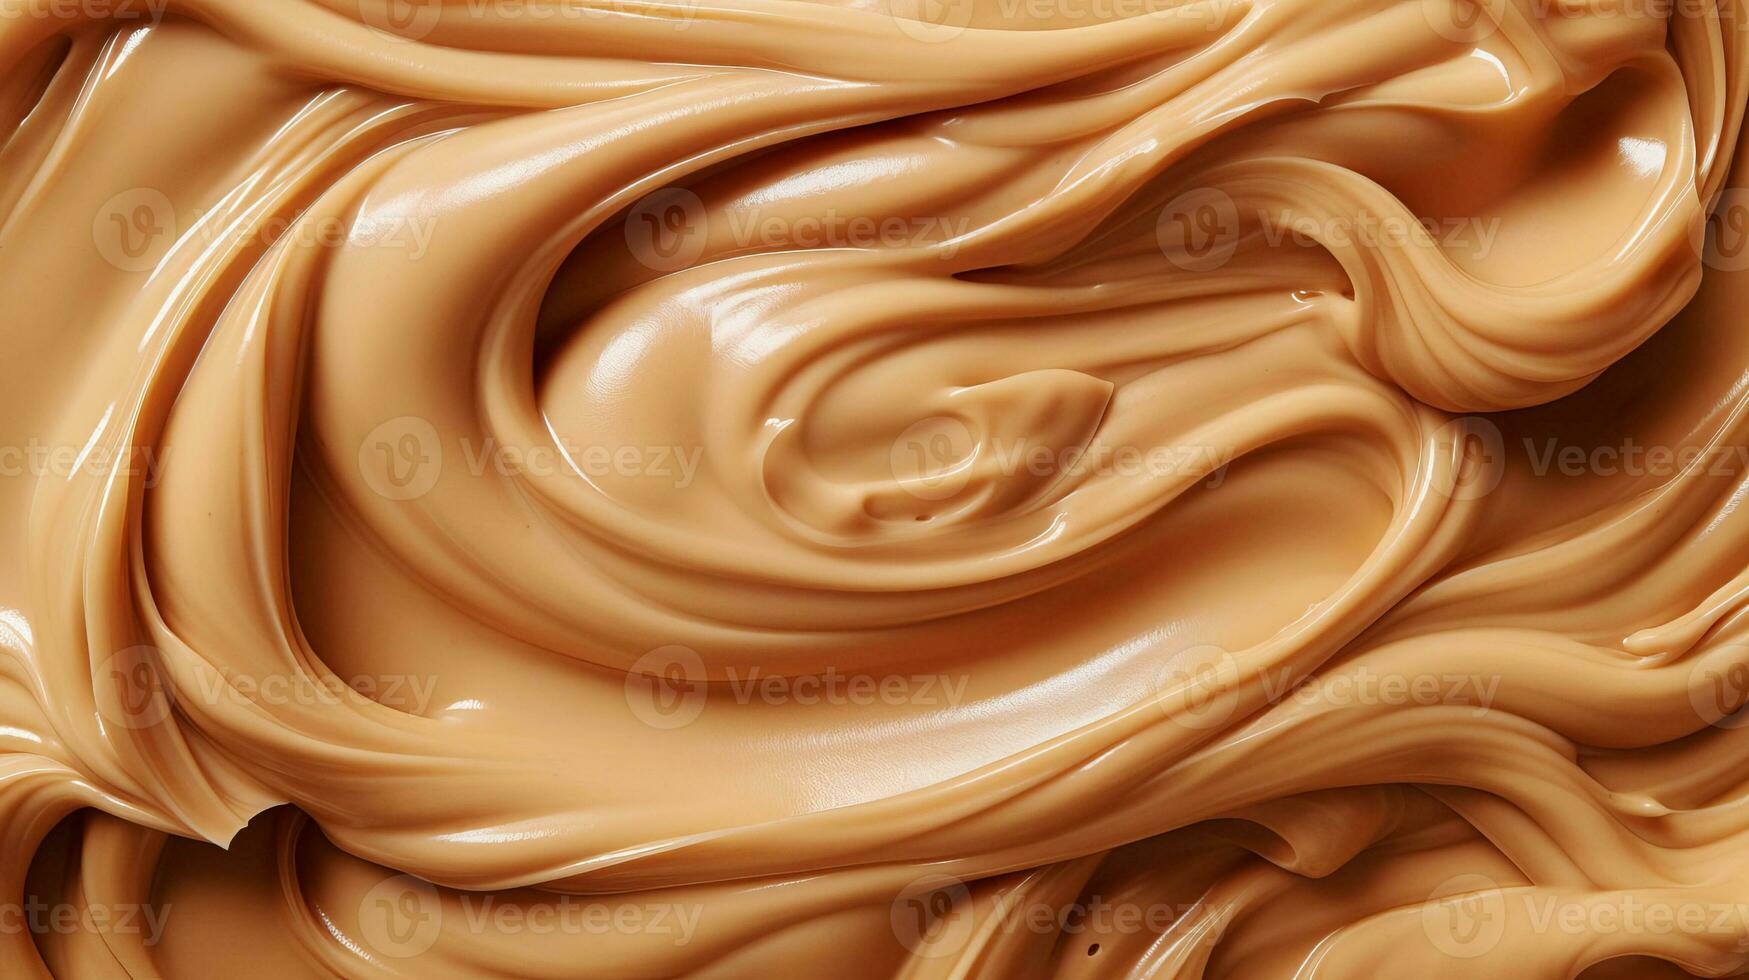 Sample close-up top view of caramelized peanut butter photo